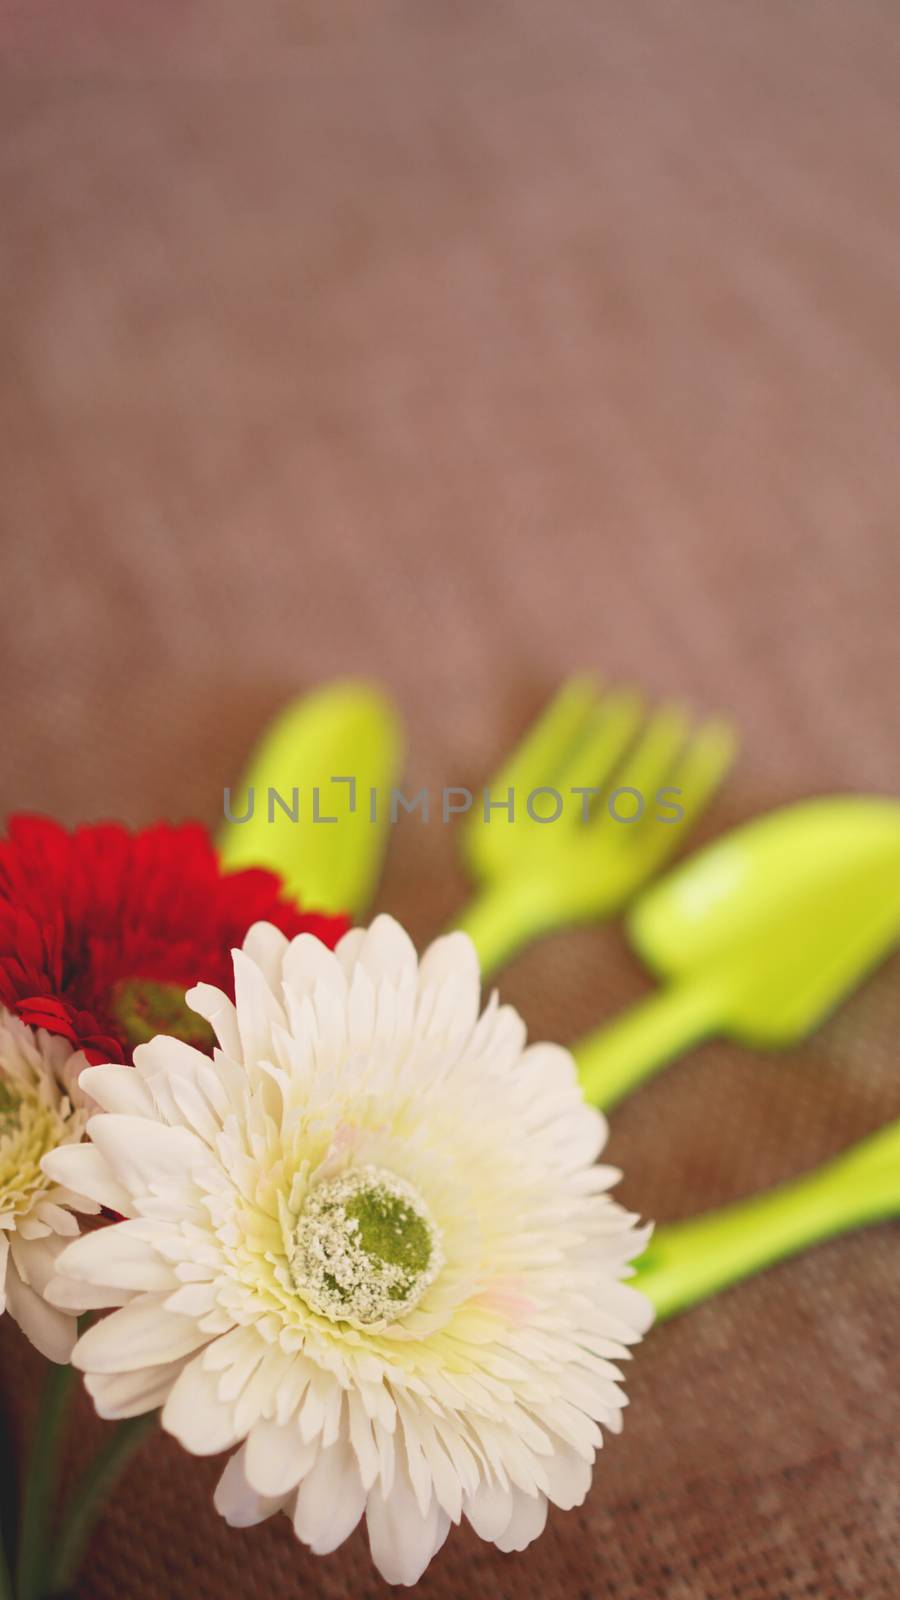 Gardening background. Gardening green tools and flowers - soft focus - vertical format